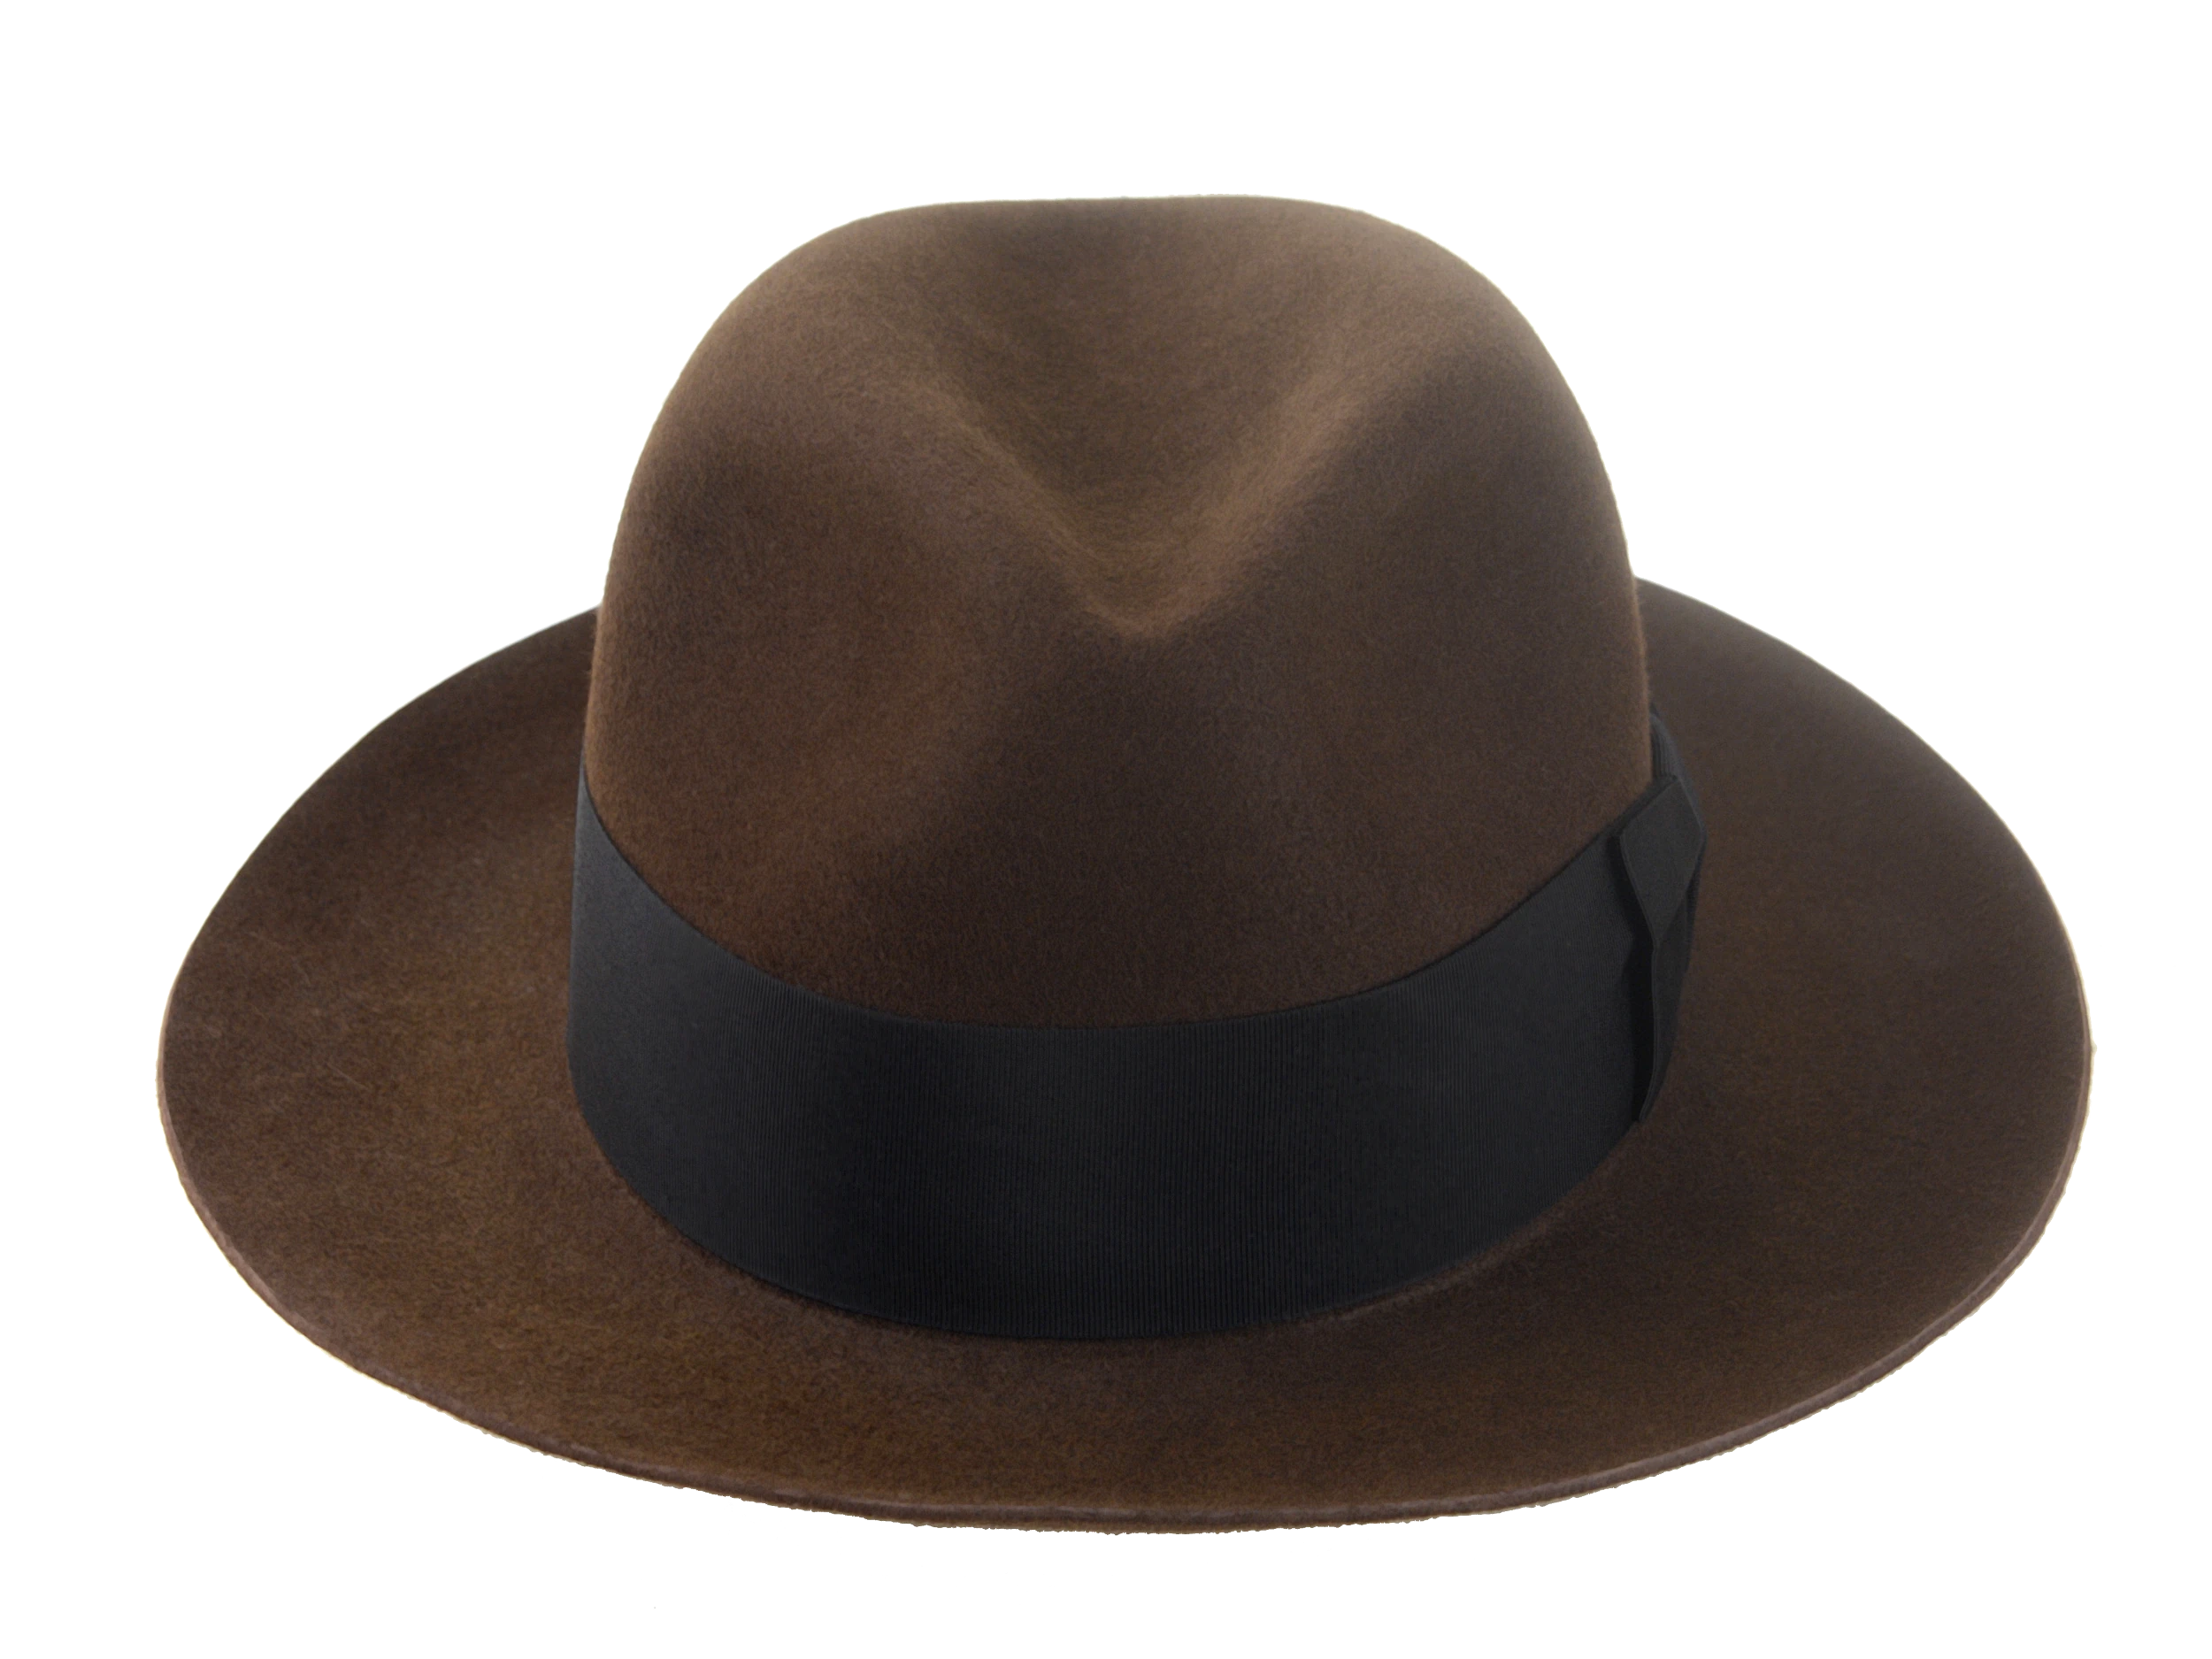 The Silkstone: Image of the smooth surface finish and elegant proportions | Agnoulita Hats